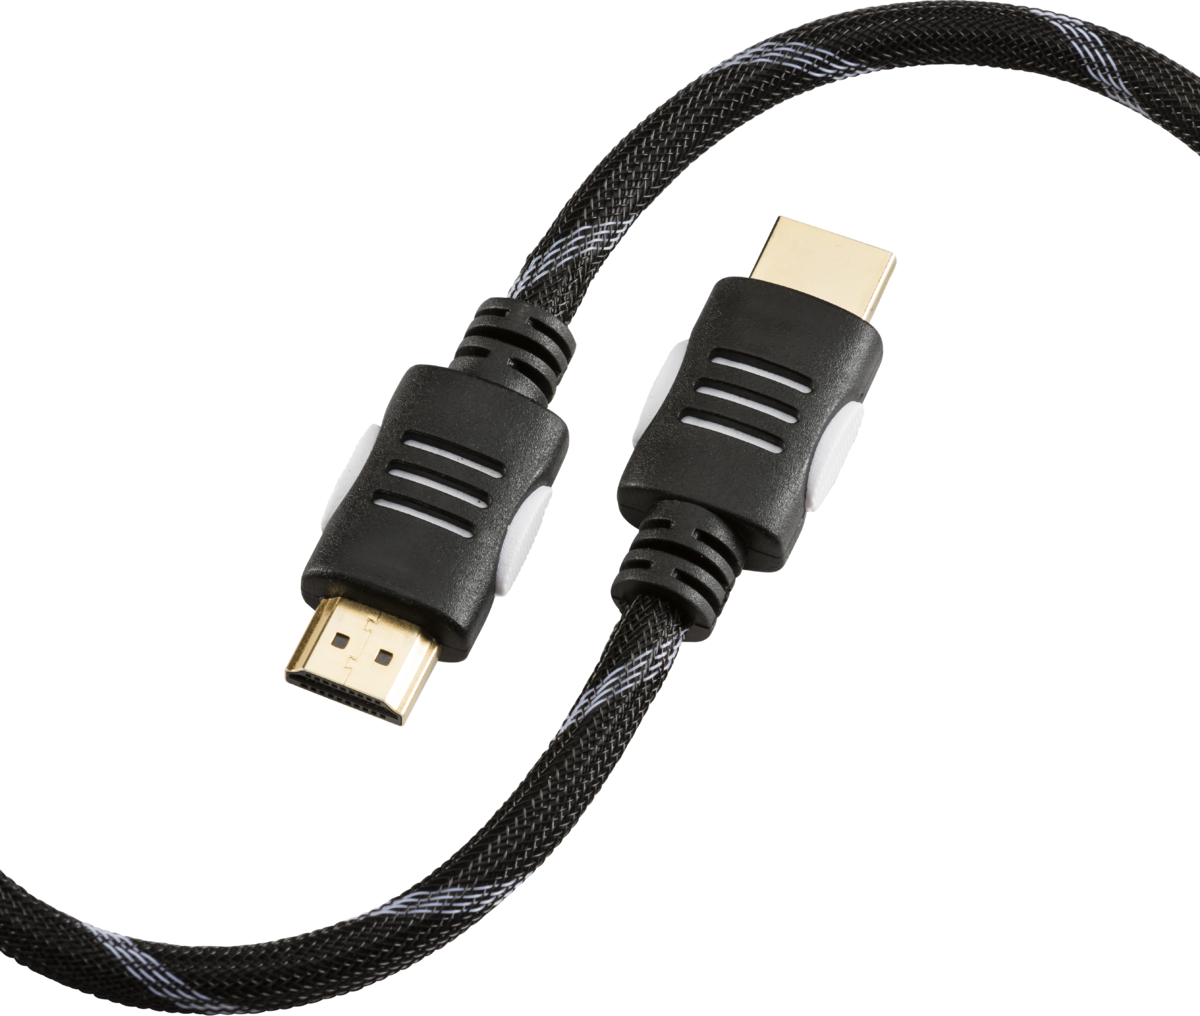 2m 4K High Speed HDMI Cable